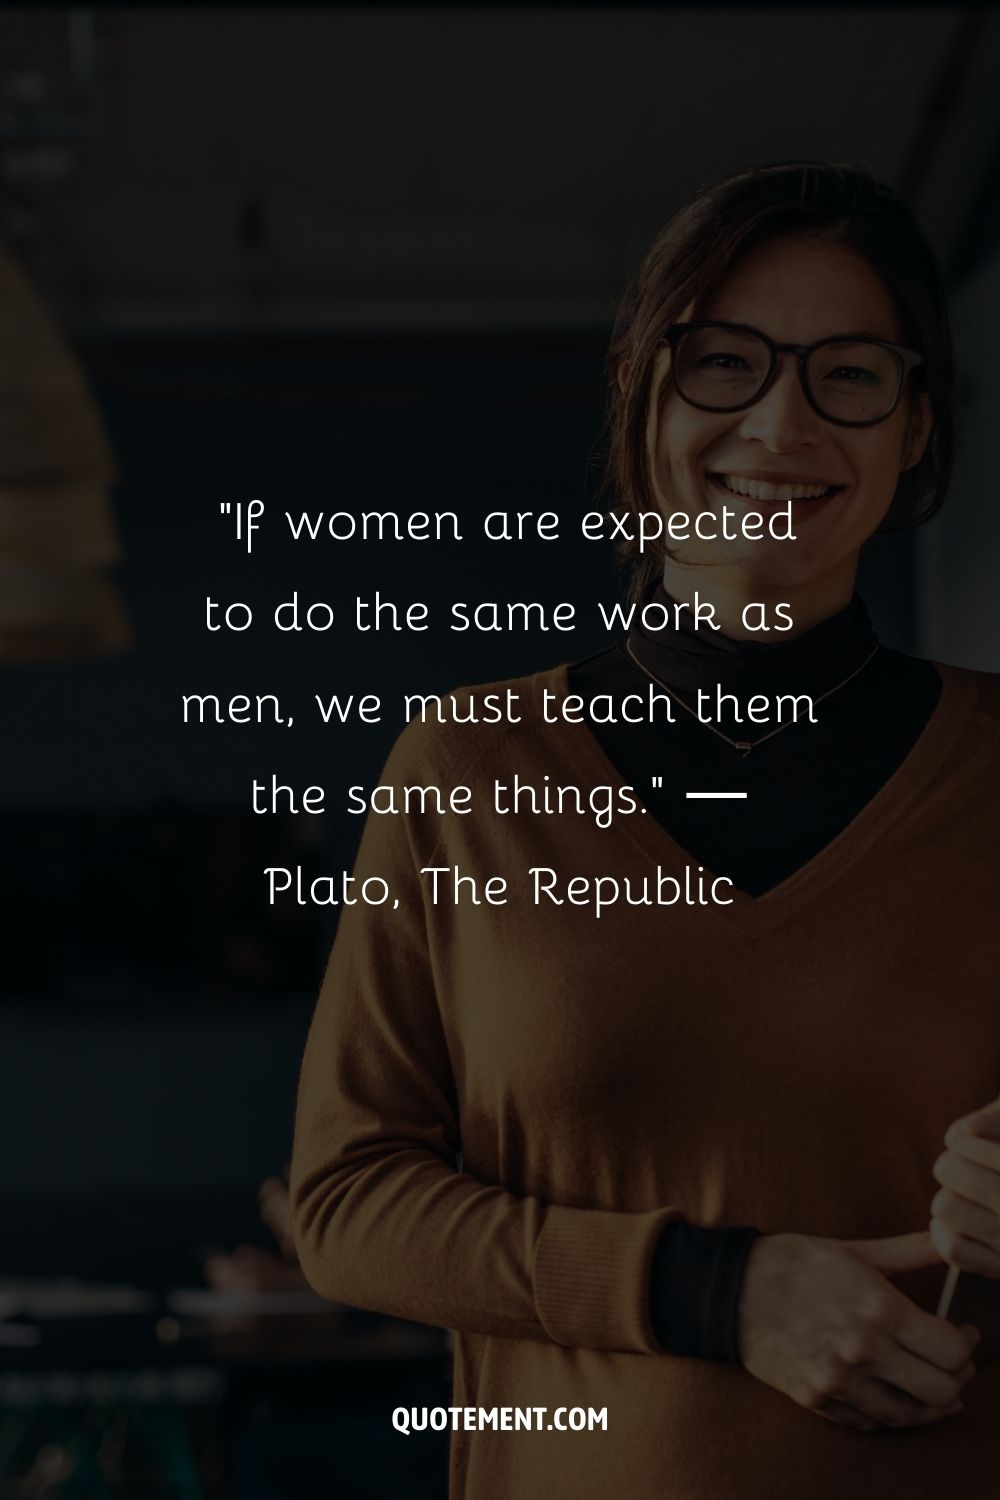 “If women are expected to do the same work as men, we must teach them the same things.” ― Plato, The Republic